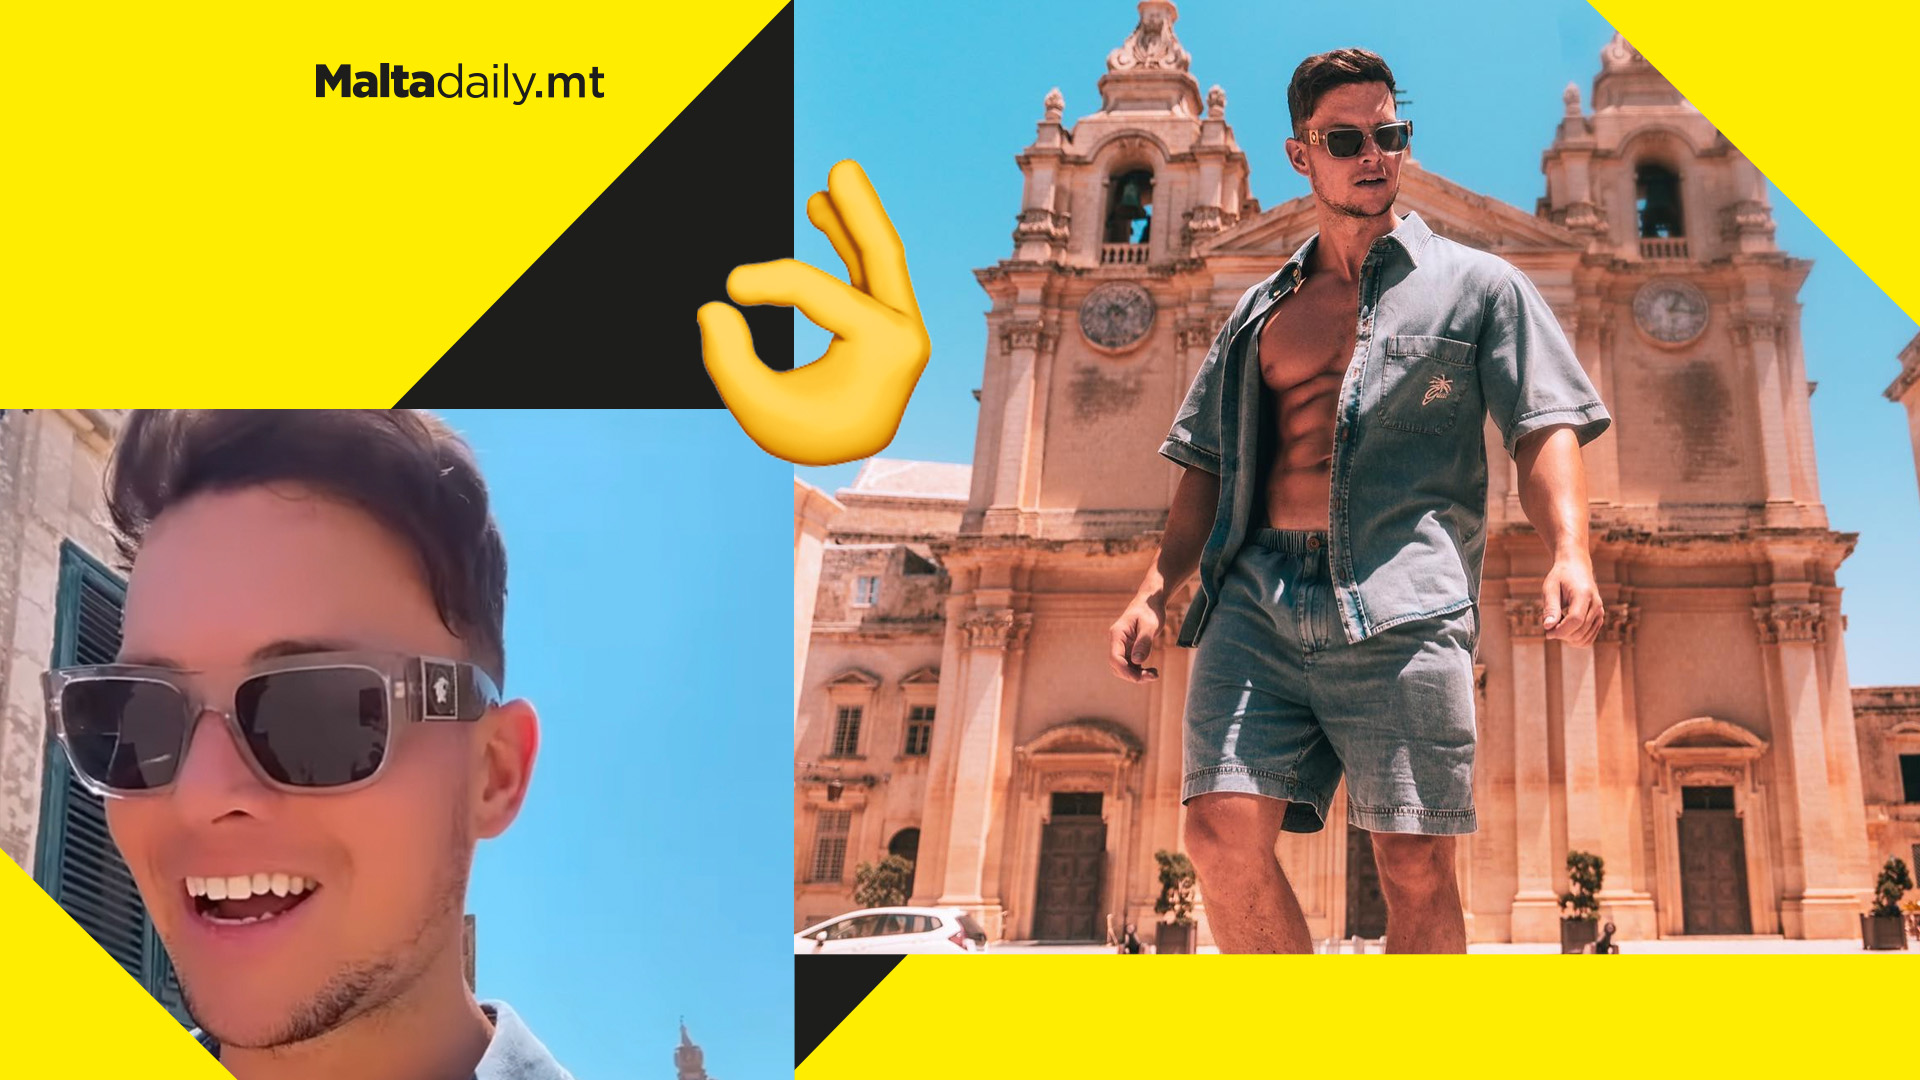 WATCH: International DJ Joel Corry calls Imdina 'one of the most beautiful places he's ever seen'